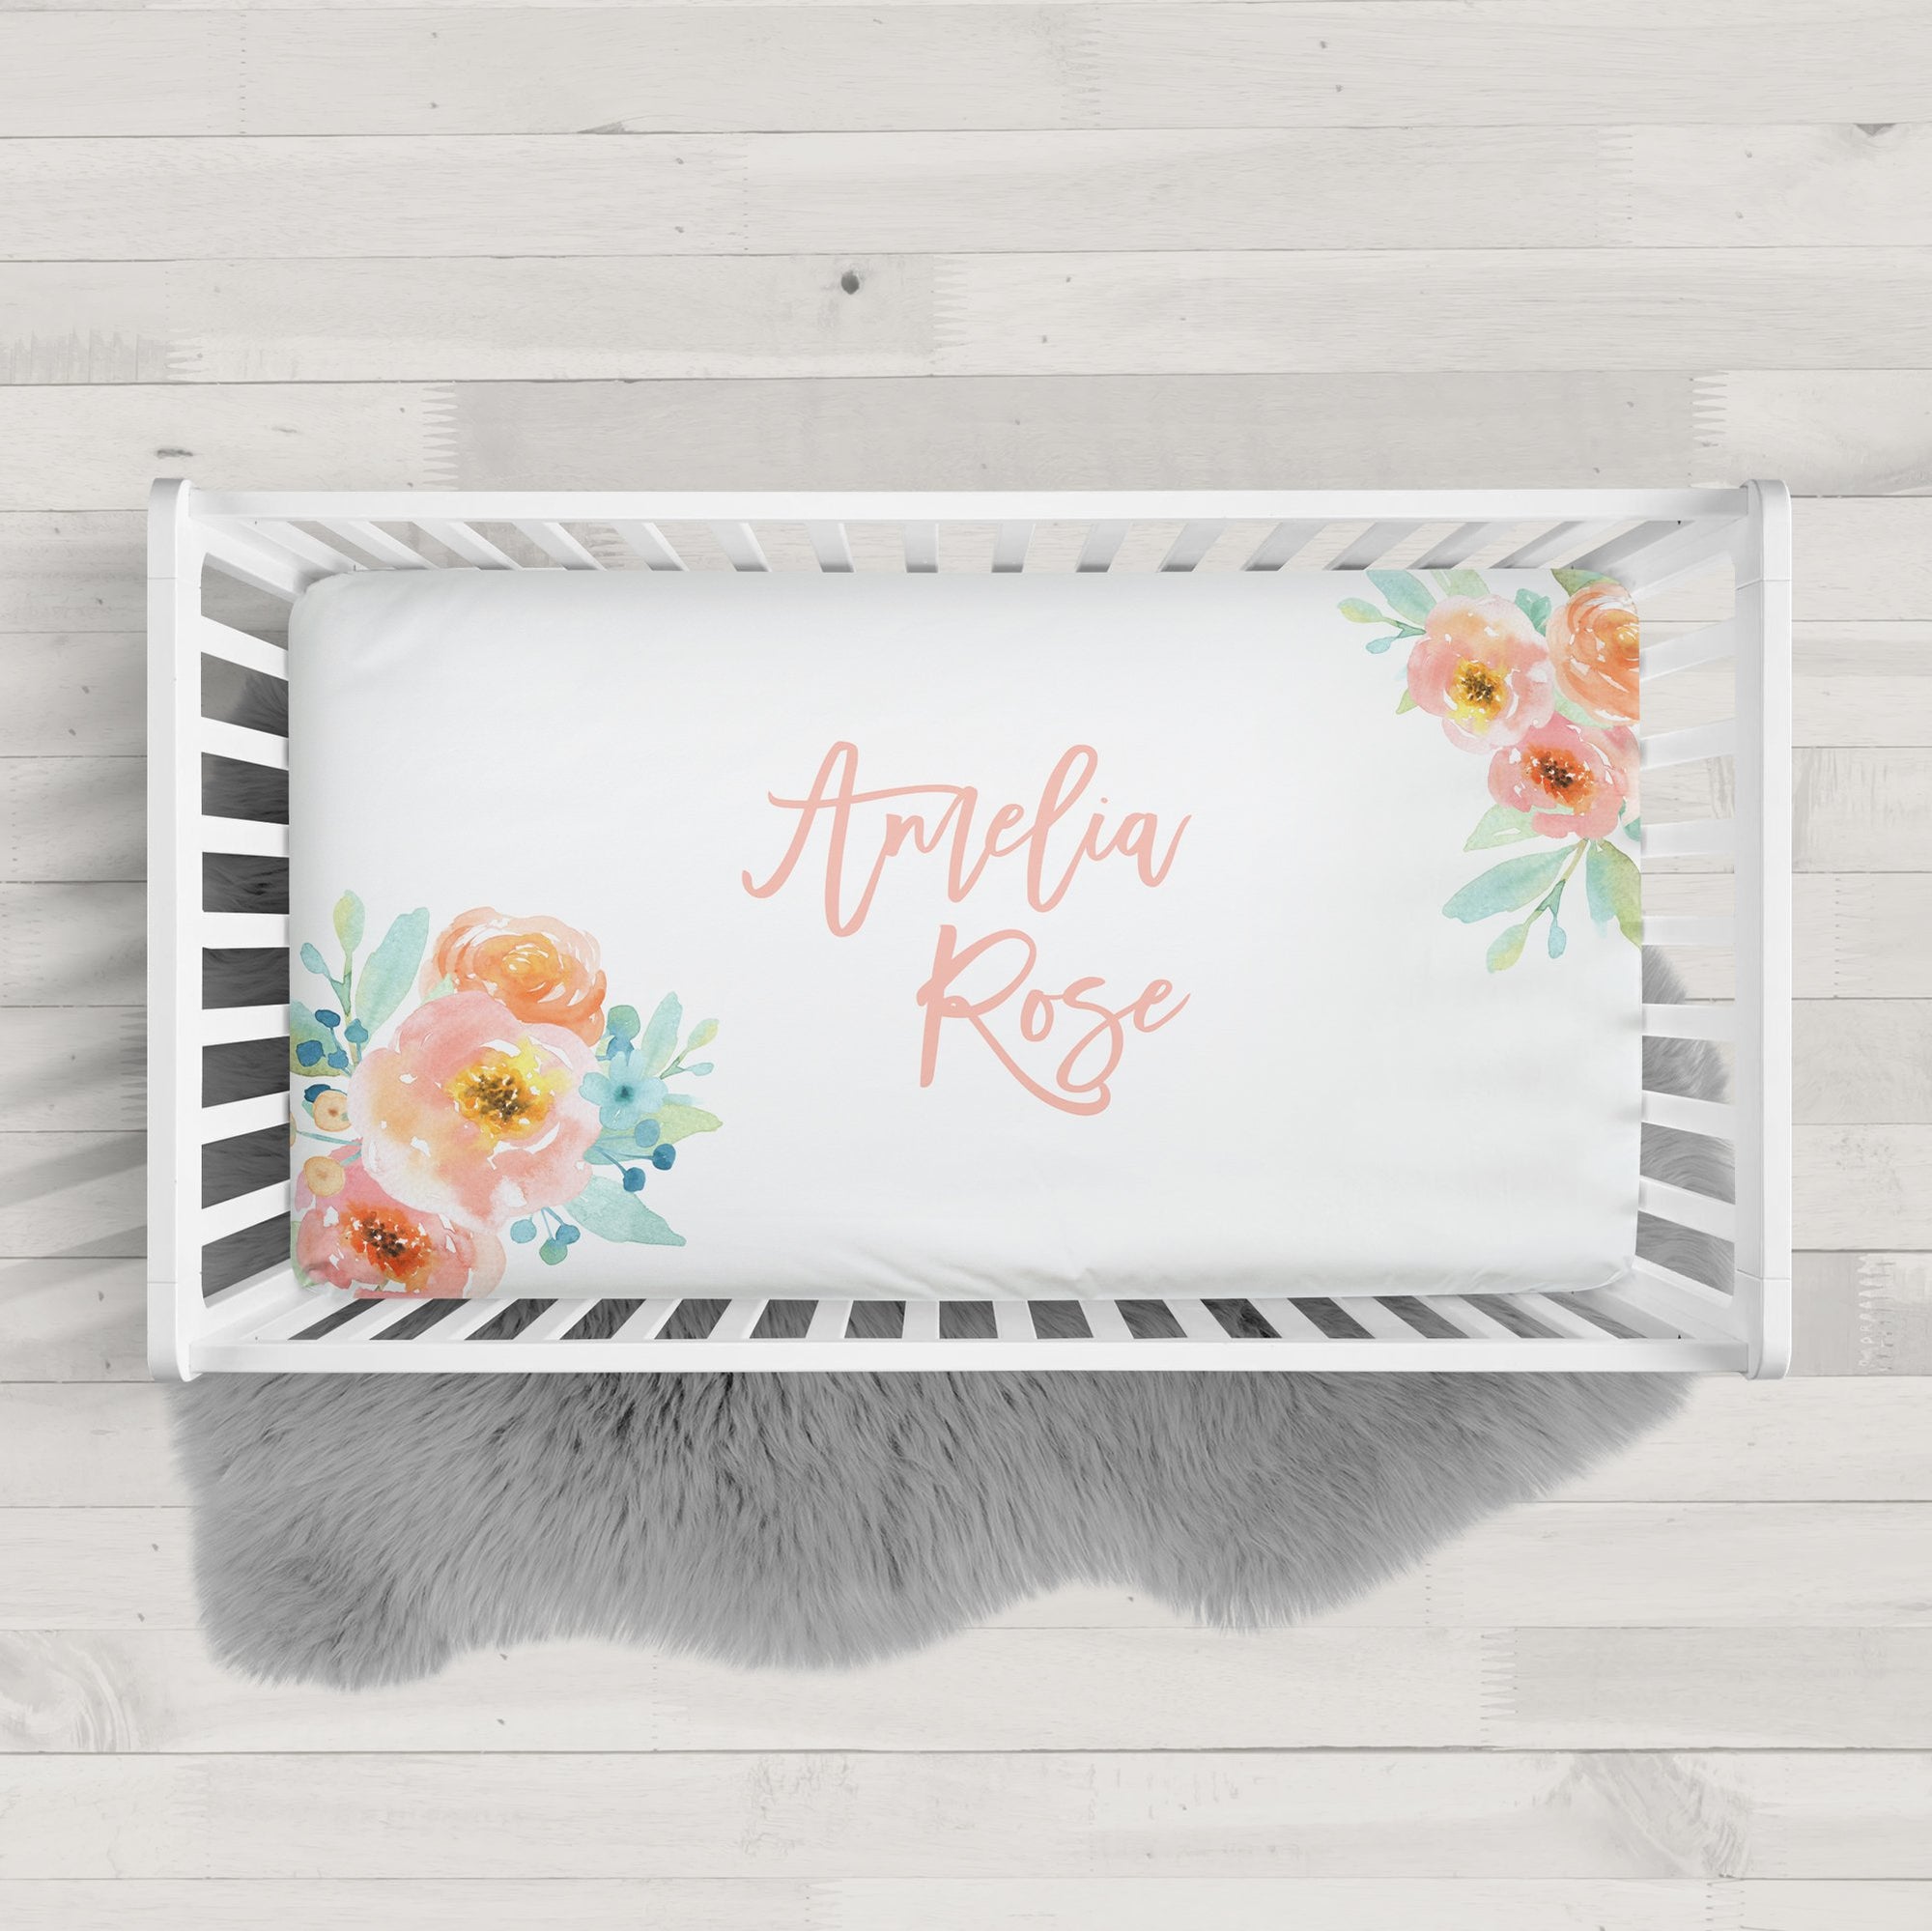 Peach roses fitted jersey knit personalized crib sheet | Pipsy.com